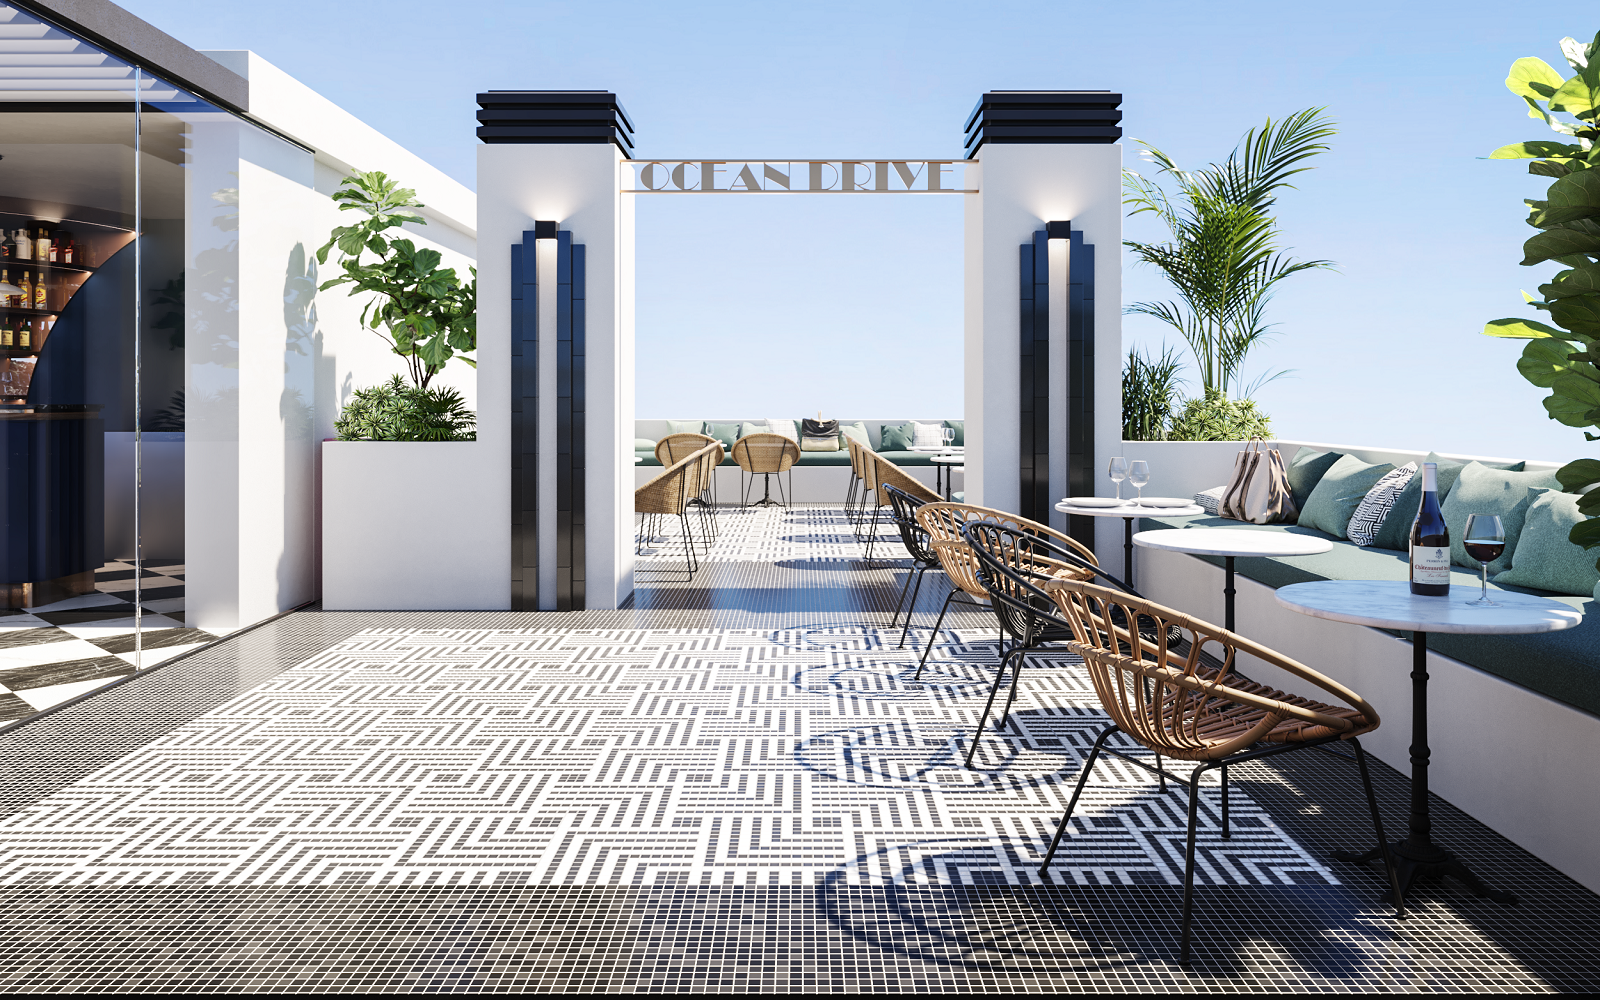 wicker chairs and tiled patterned floor at the art deco inspired entrance to Ocean Drive Ibiza